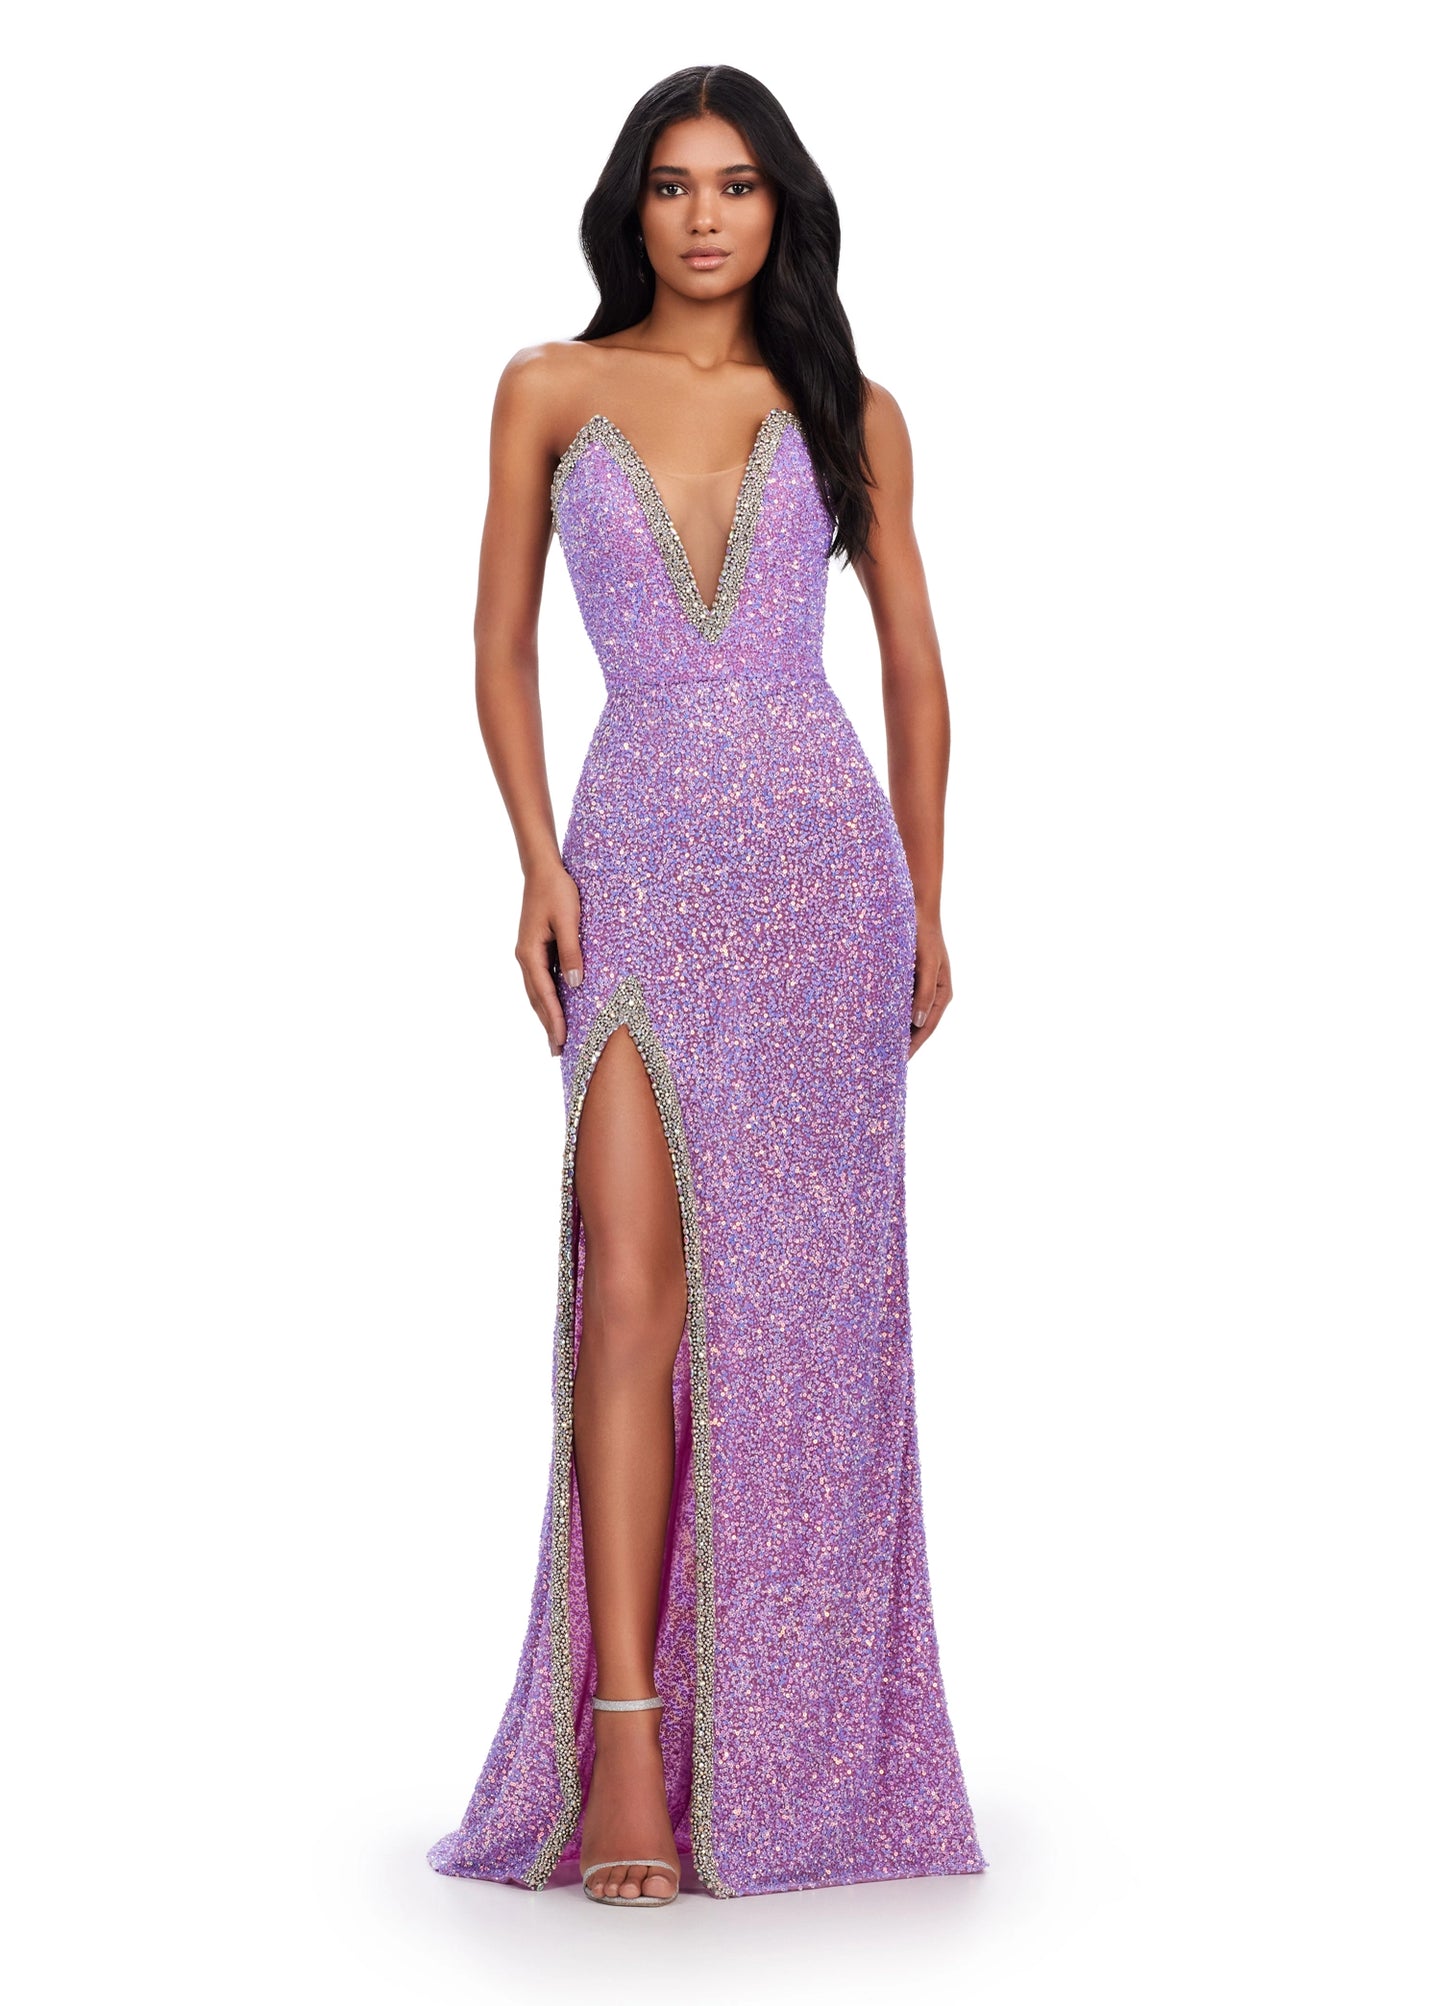 Look glamorous in this Ashley Lauren 11521 beaded sequin pageant dress. Featuring a strapless bodice, a crystal V neckline, beaded sequins, a full skirt with a slit, and a floor-length hem. Look absolutely stunning at your next formal event. Bring the glam! This fully beaded strapless gown features a deep v neckline and a left leg slit.